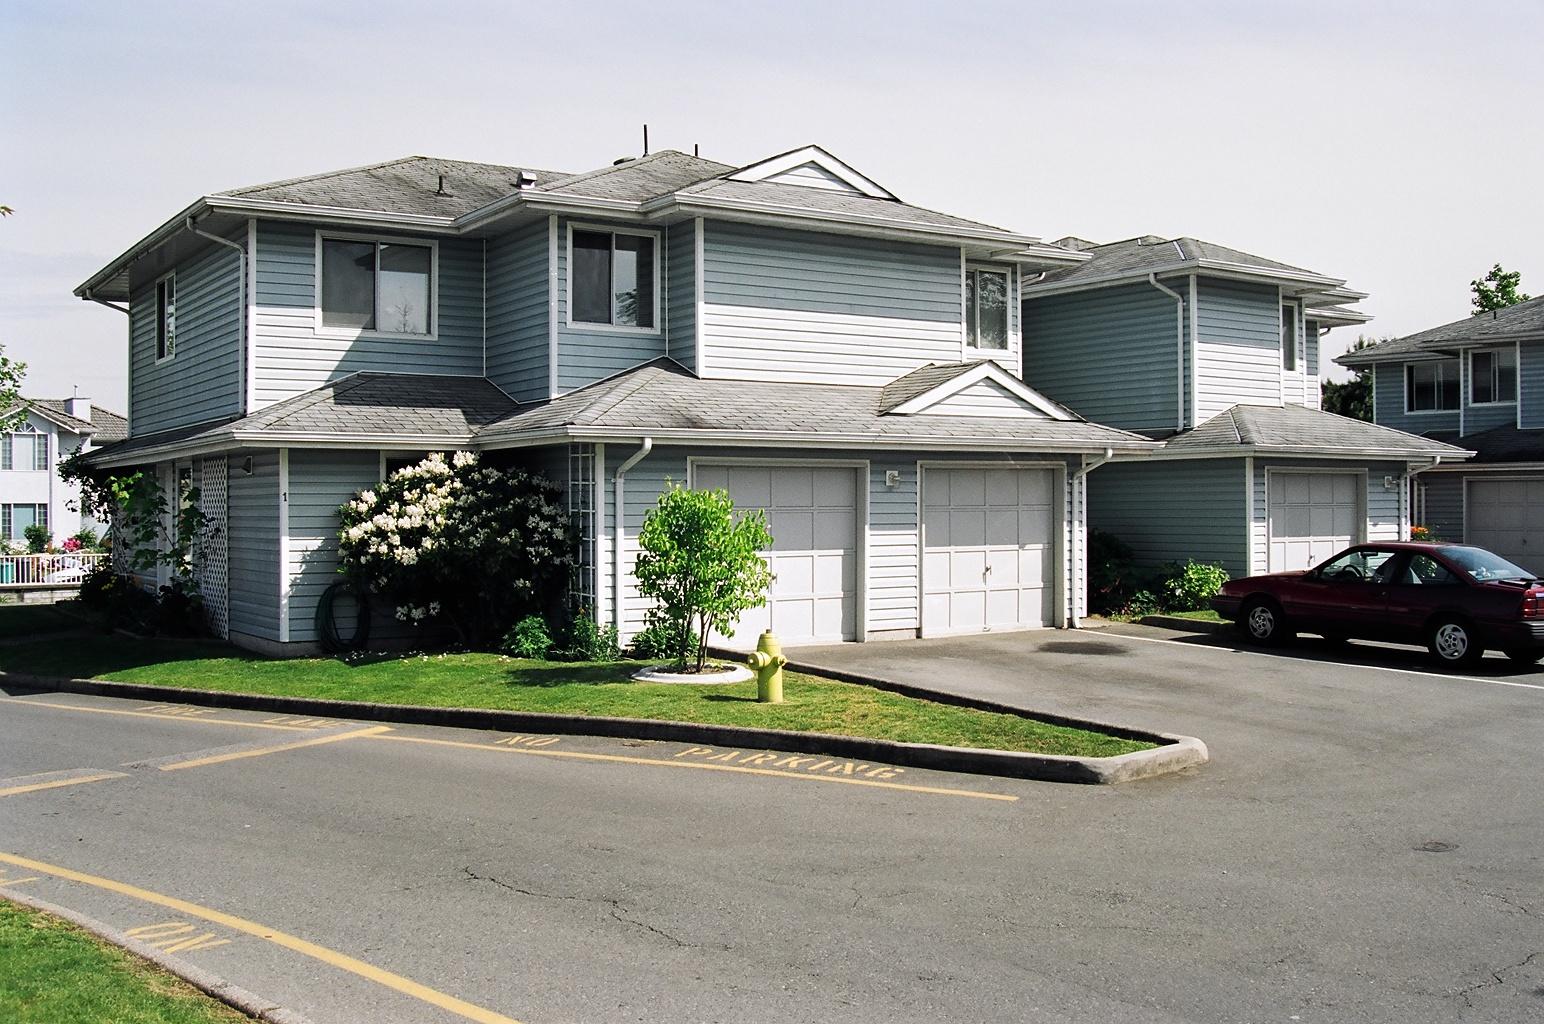 Affordable Housing Societies  A wide range of housing options for  residents of the Lower Mainland